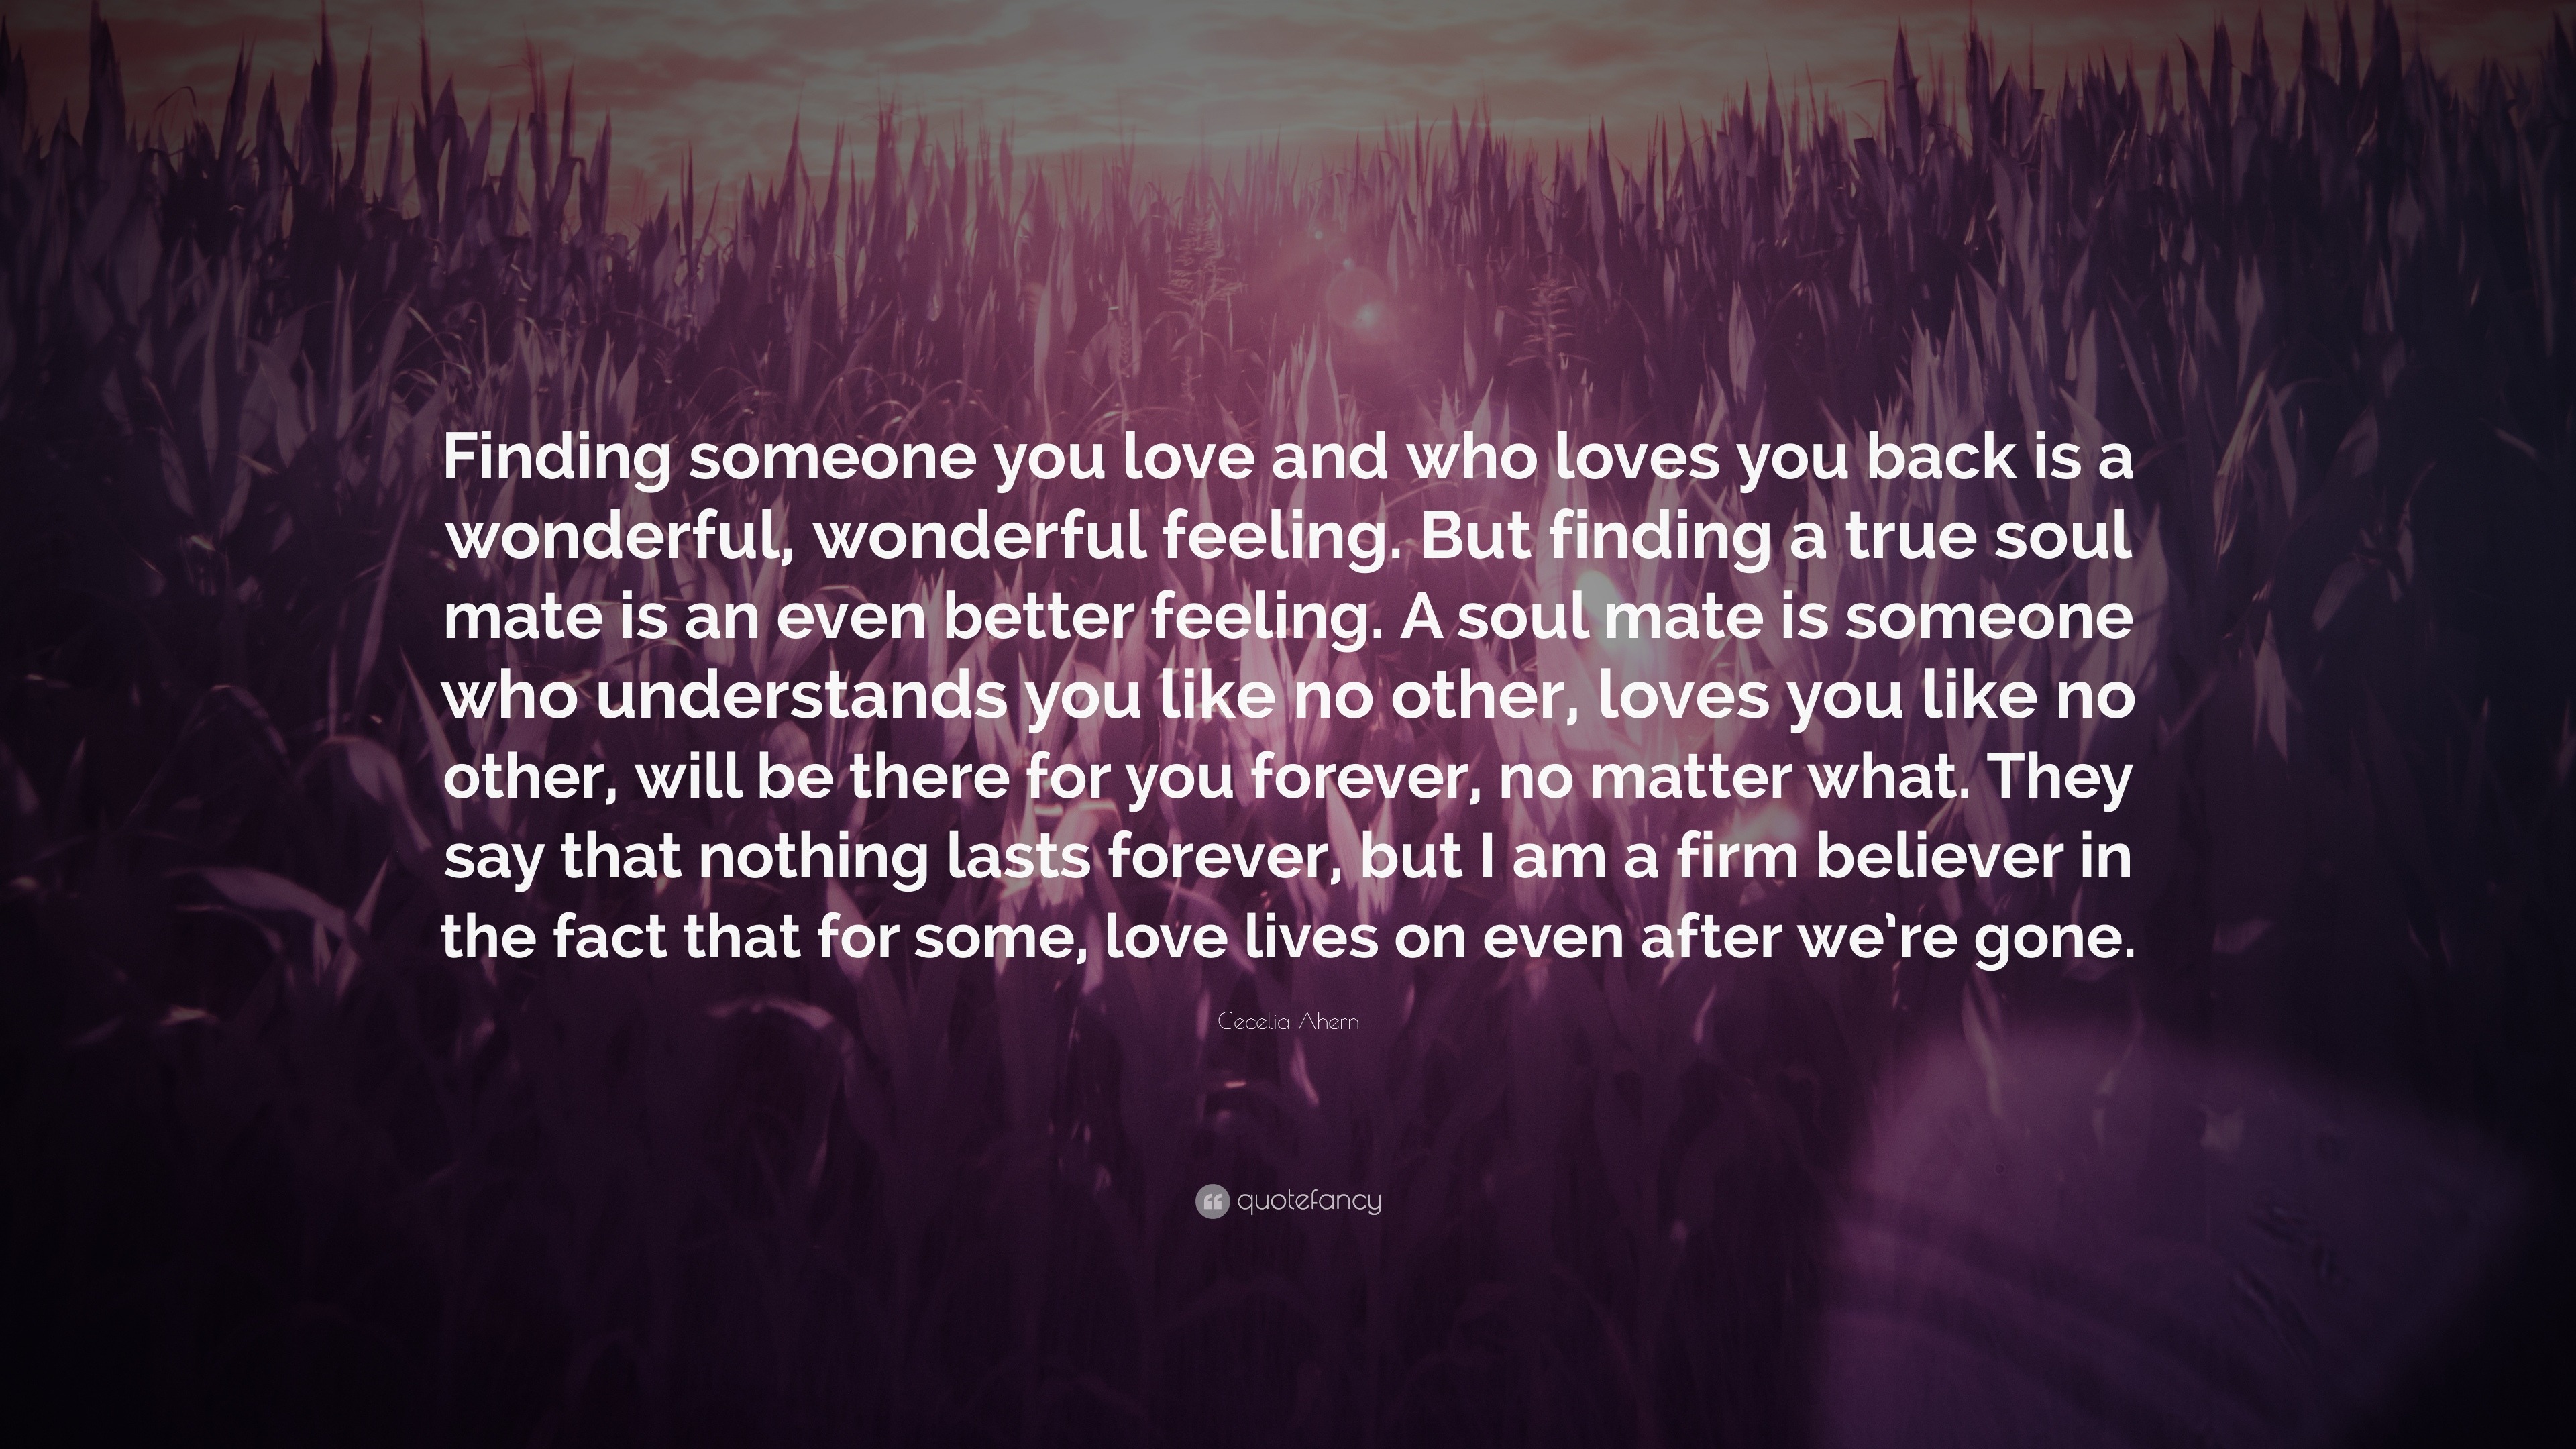 Cecelia Ahern Quote “Finding someone you love and who loves you back is a